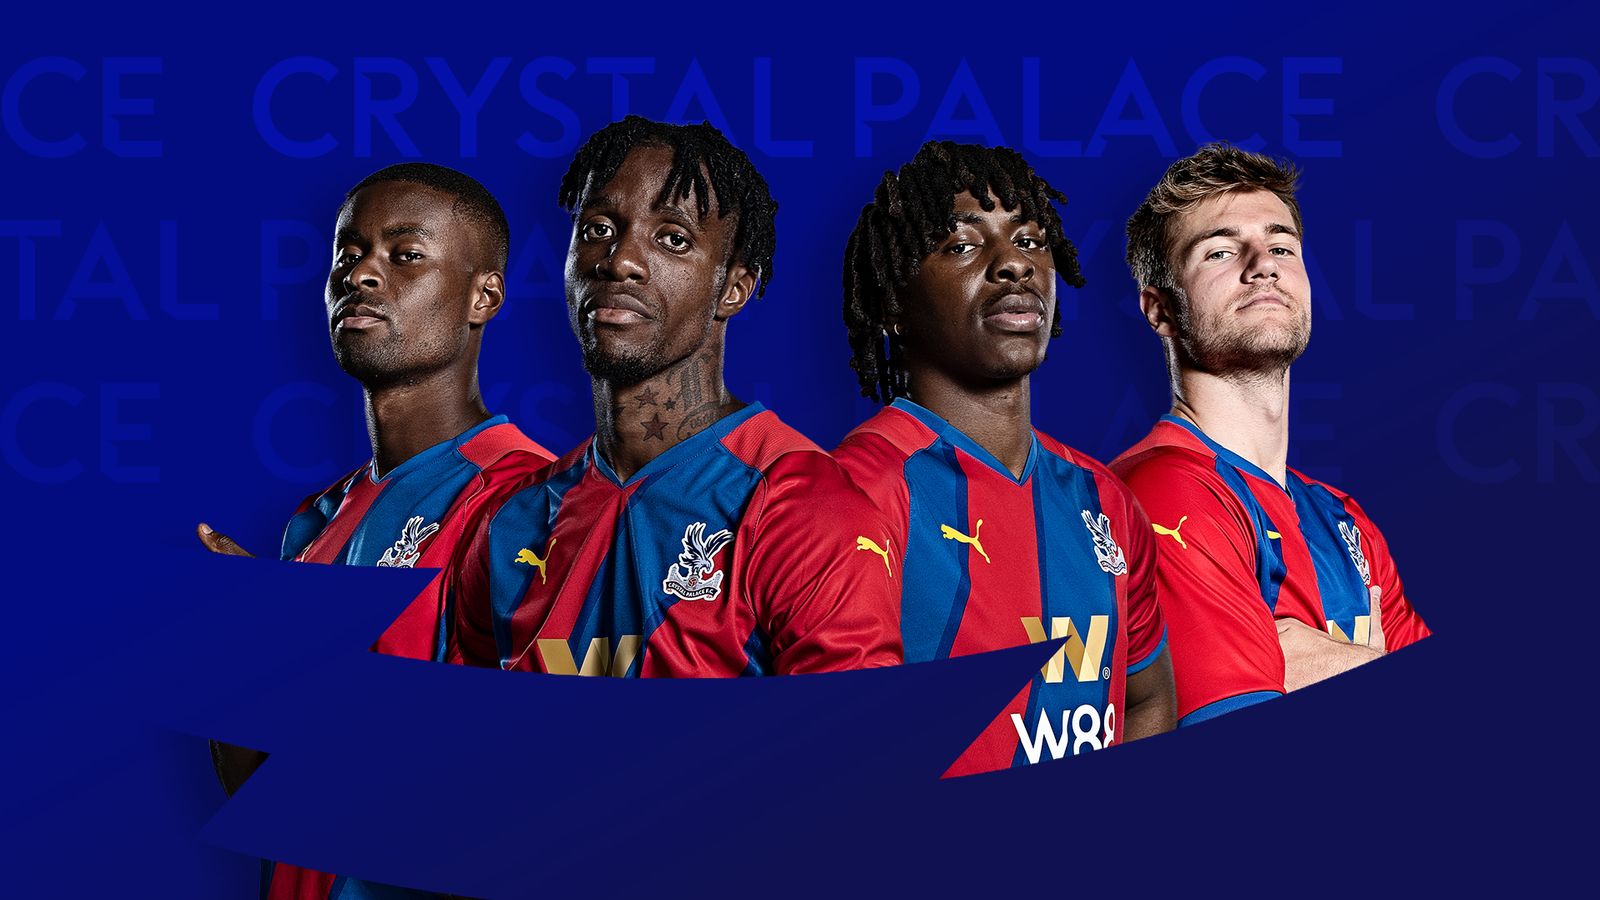 Crystal Palace: Premier League 2022/23 fixtures and schedule